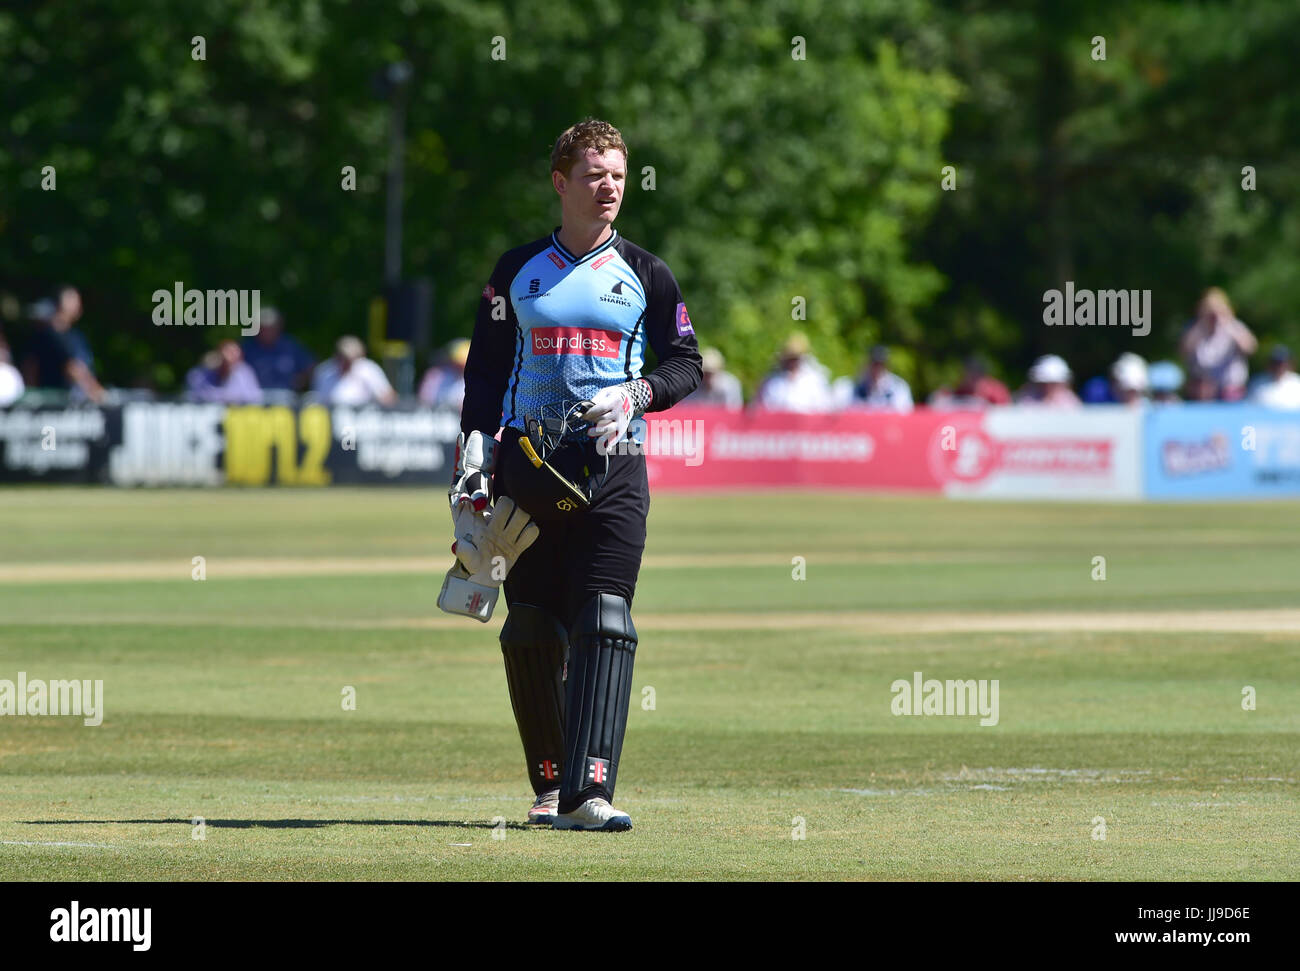 Wicketkeeper Ben Brown of Sussex Sharks v Glamorgan in the NatWest T20 blast match at the Arundel Castle ground in West Sussex UK Sunday 9th July 2017 Photograph taken by Simon Dack Stock Photo